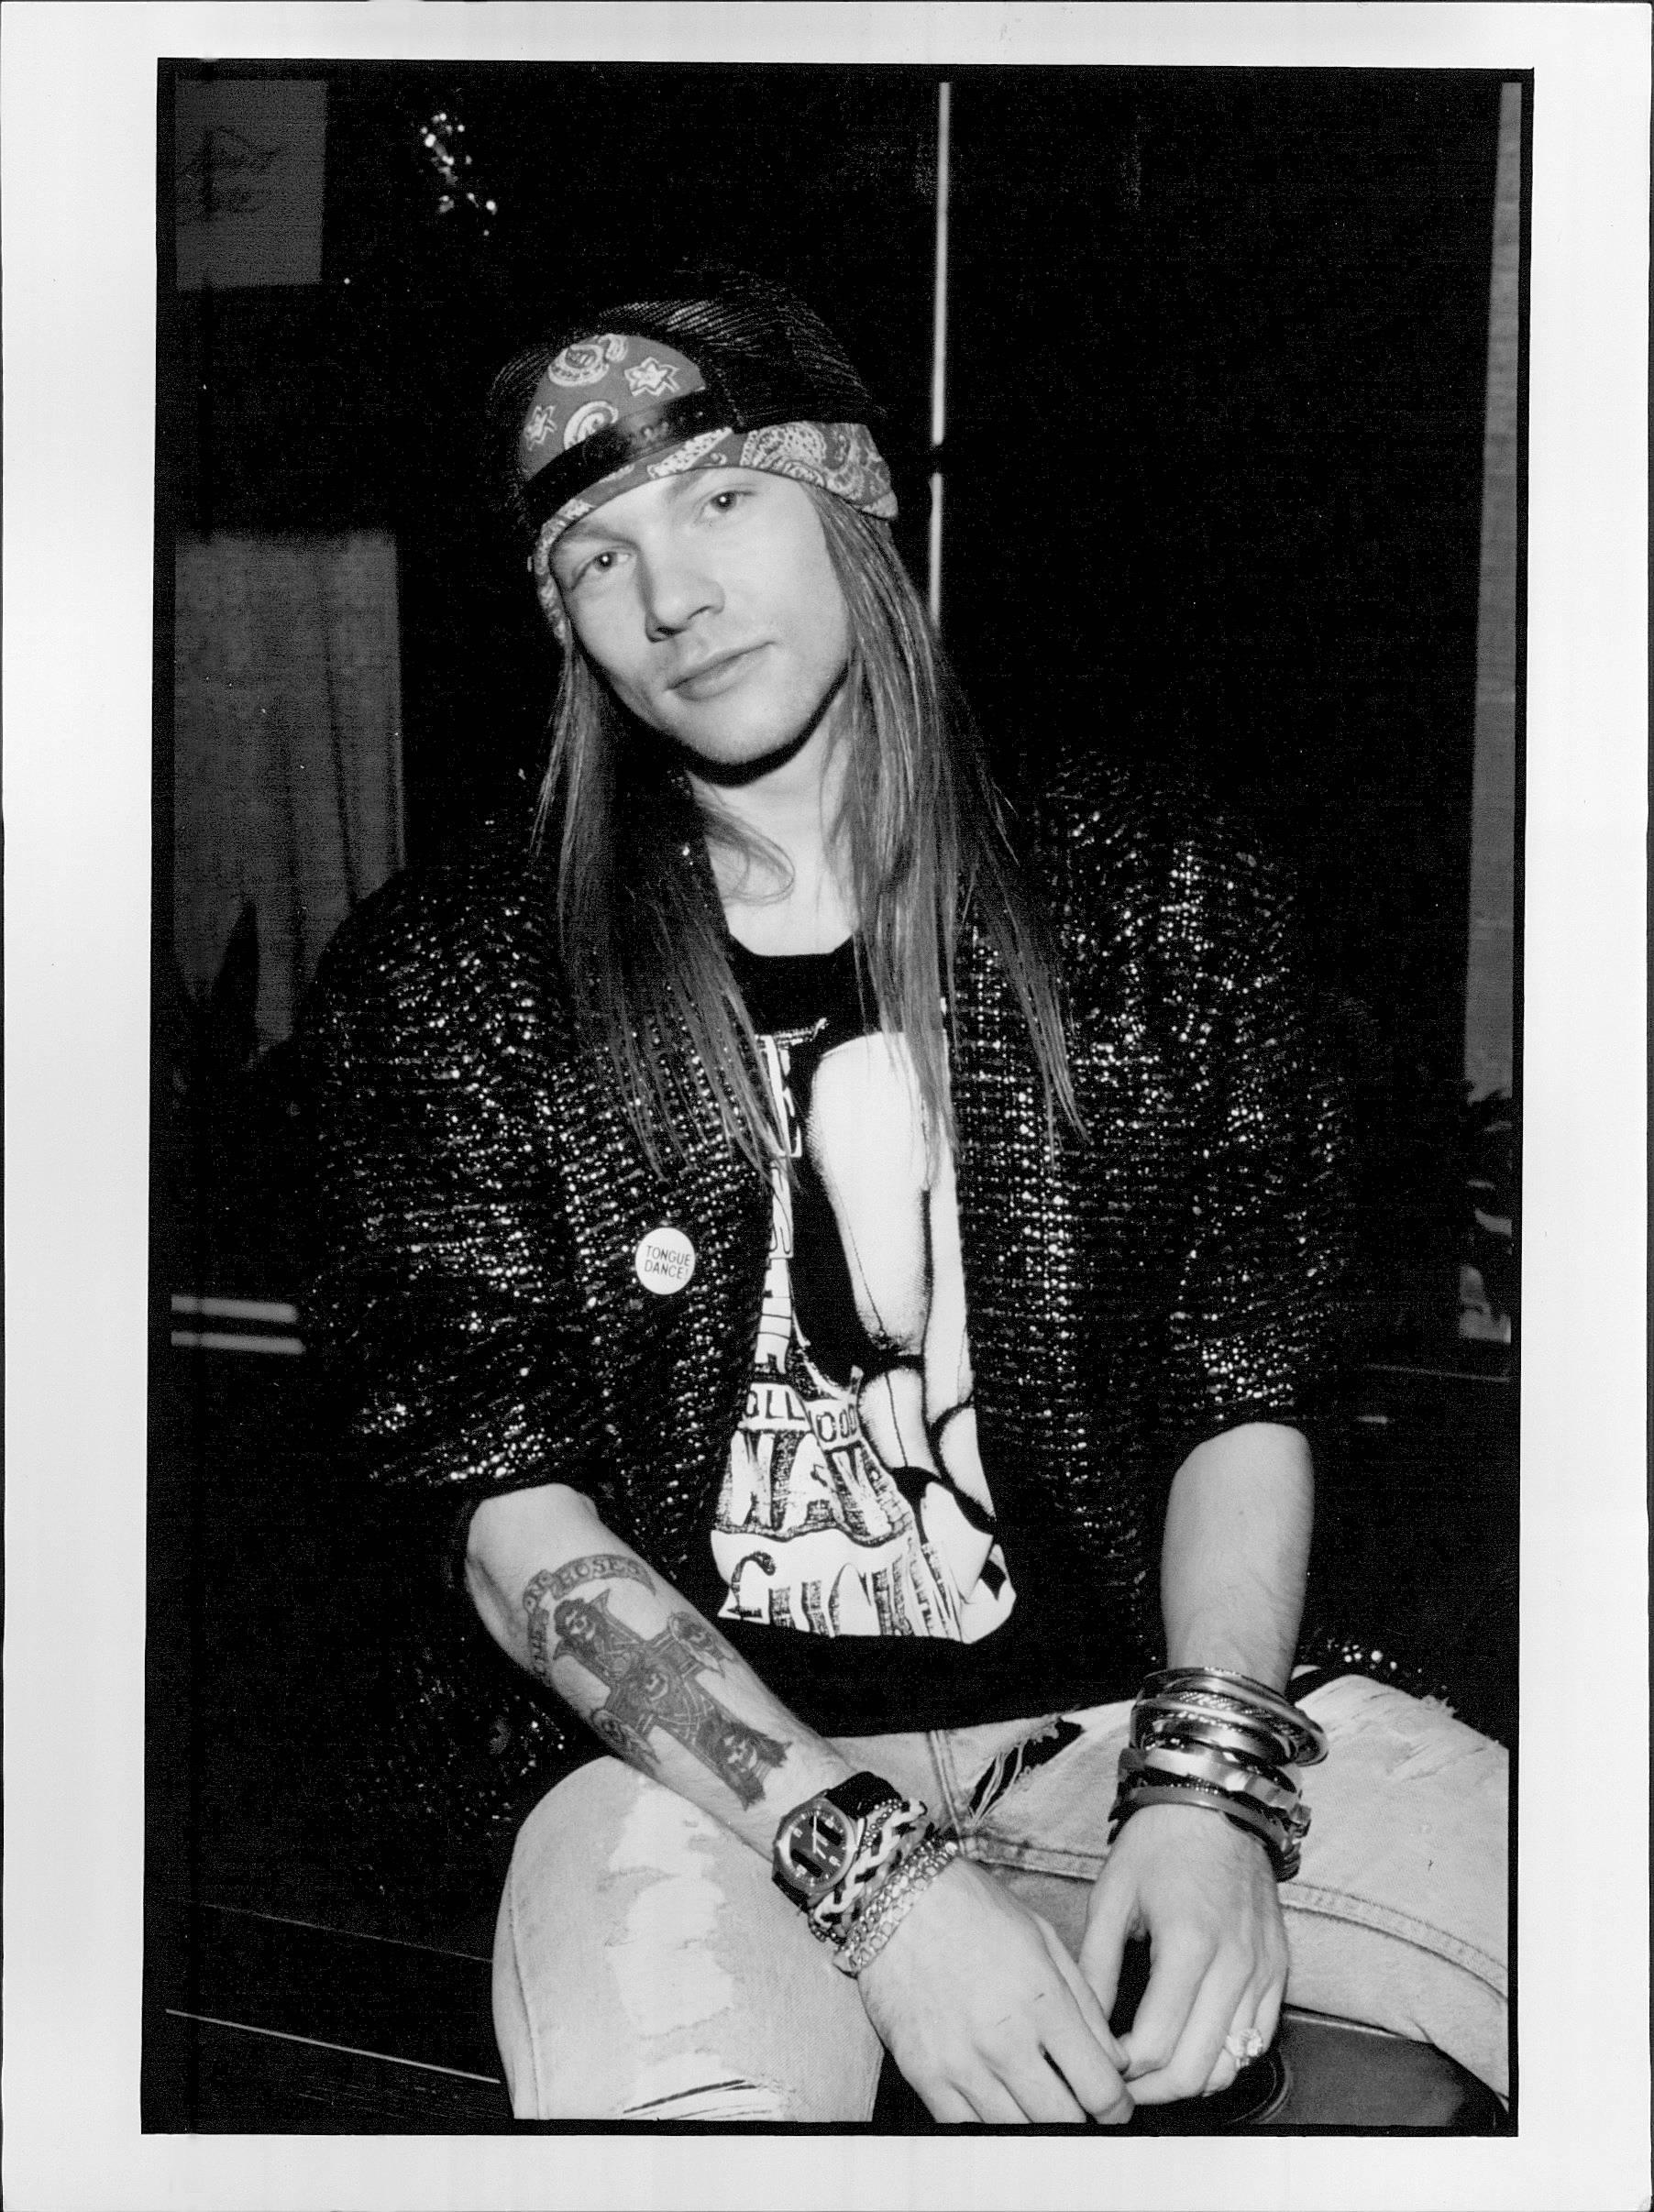 Kevin Mazur Black and White Photograph - Young Axl Rose in Backwards Cap Vintage Original Photograph